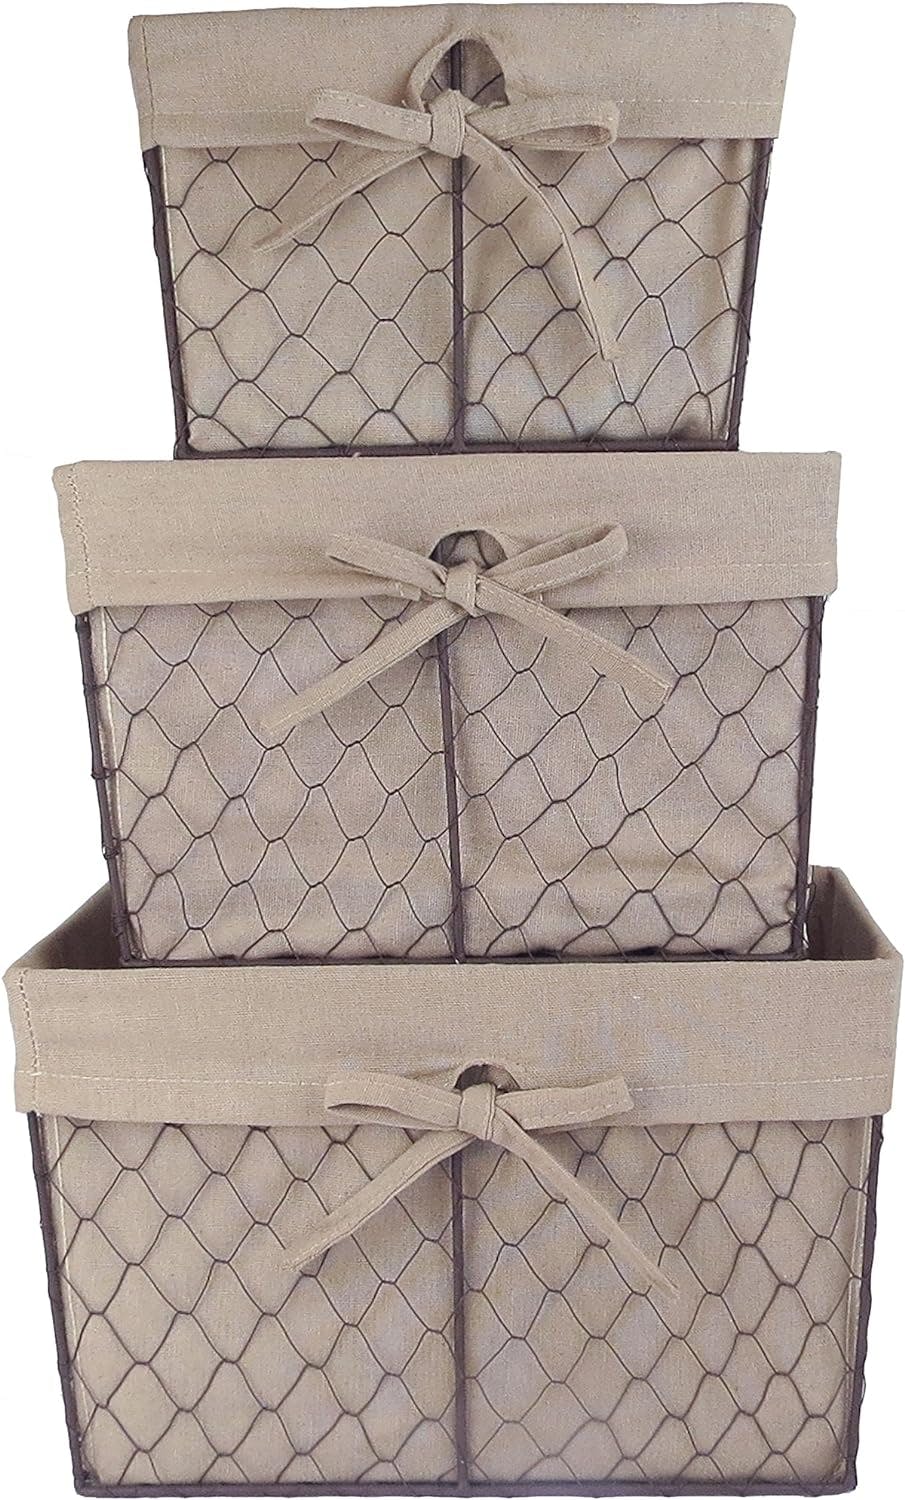 Rustic Country Rectangular Wire Basket Set with Beige Liners, Set of 3